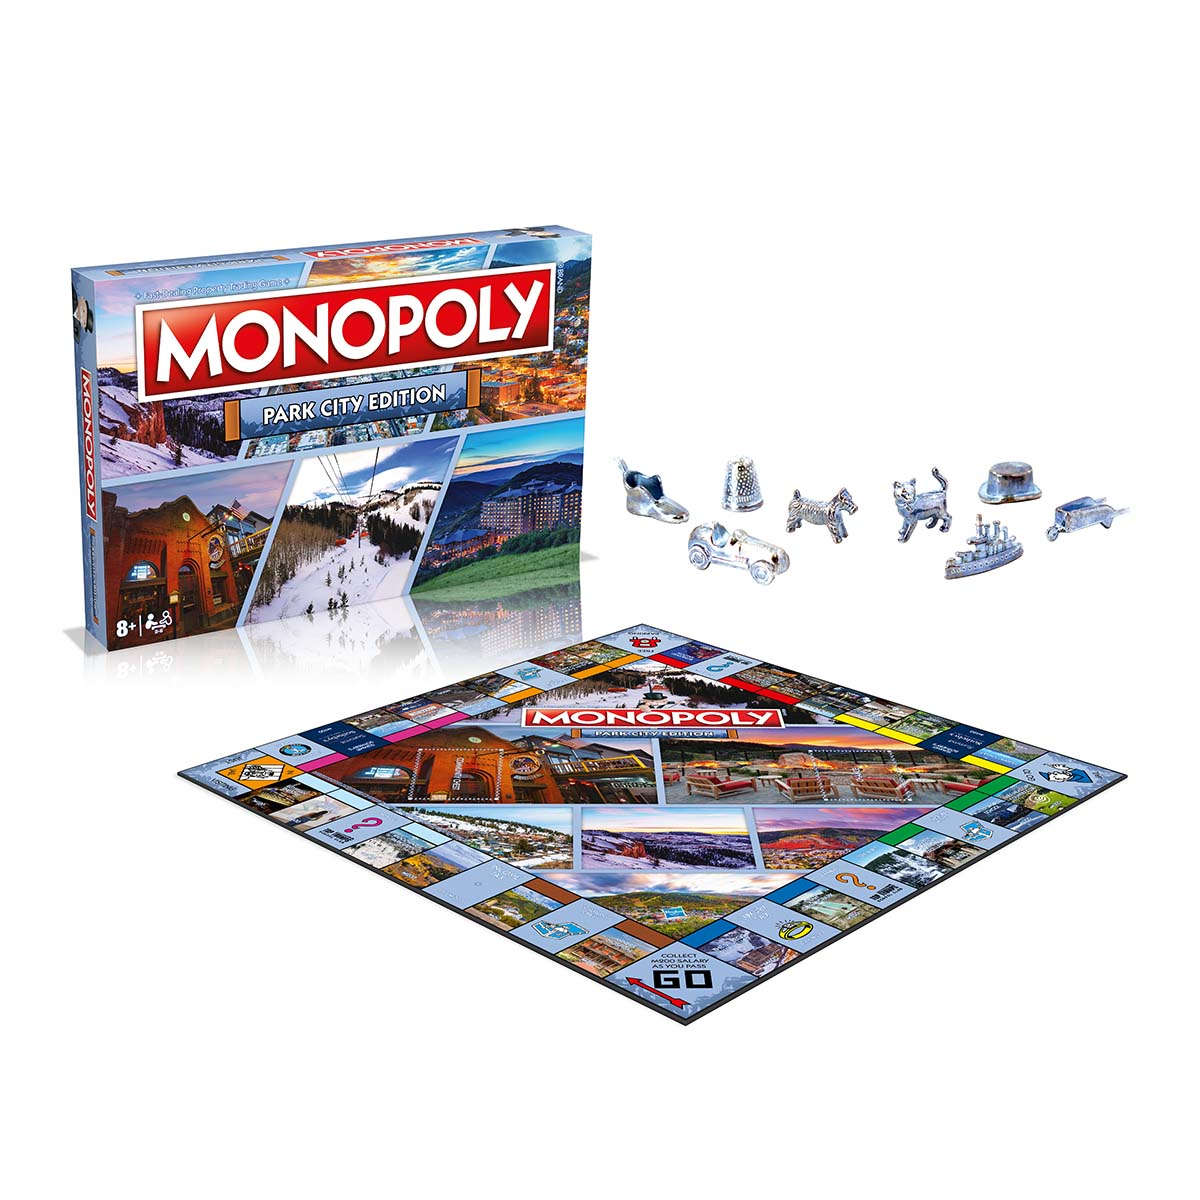 Park City Edition Monopoly Board Game